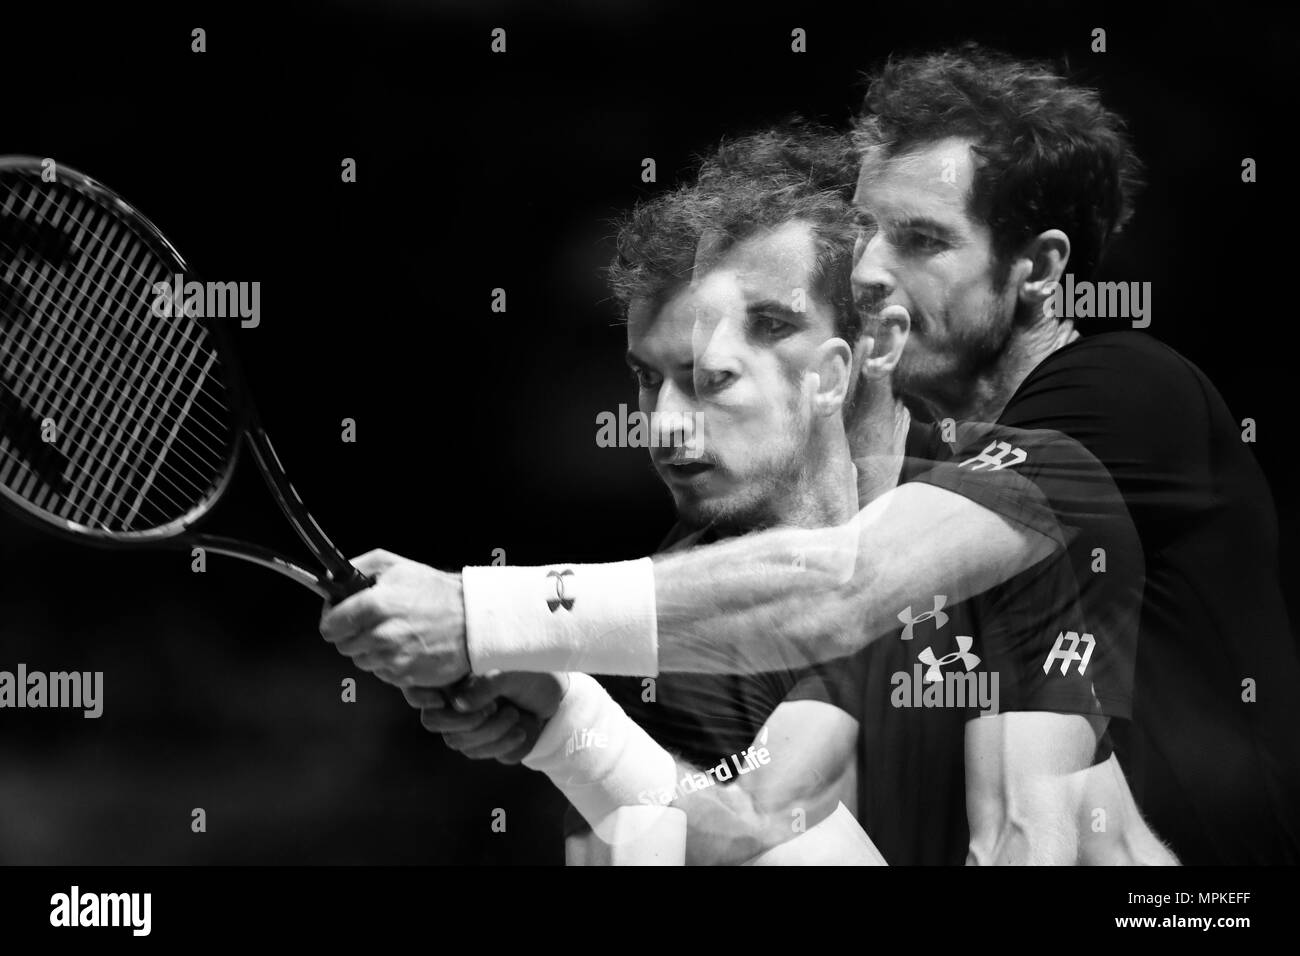 Andy Murray vs David Ferrer during Day 2 of the 2015 Barclays ATP World Tour Finals - O2 Arena London England. 16 November 2015 --- Image by © Paul Cunningham Stock Photo